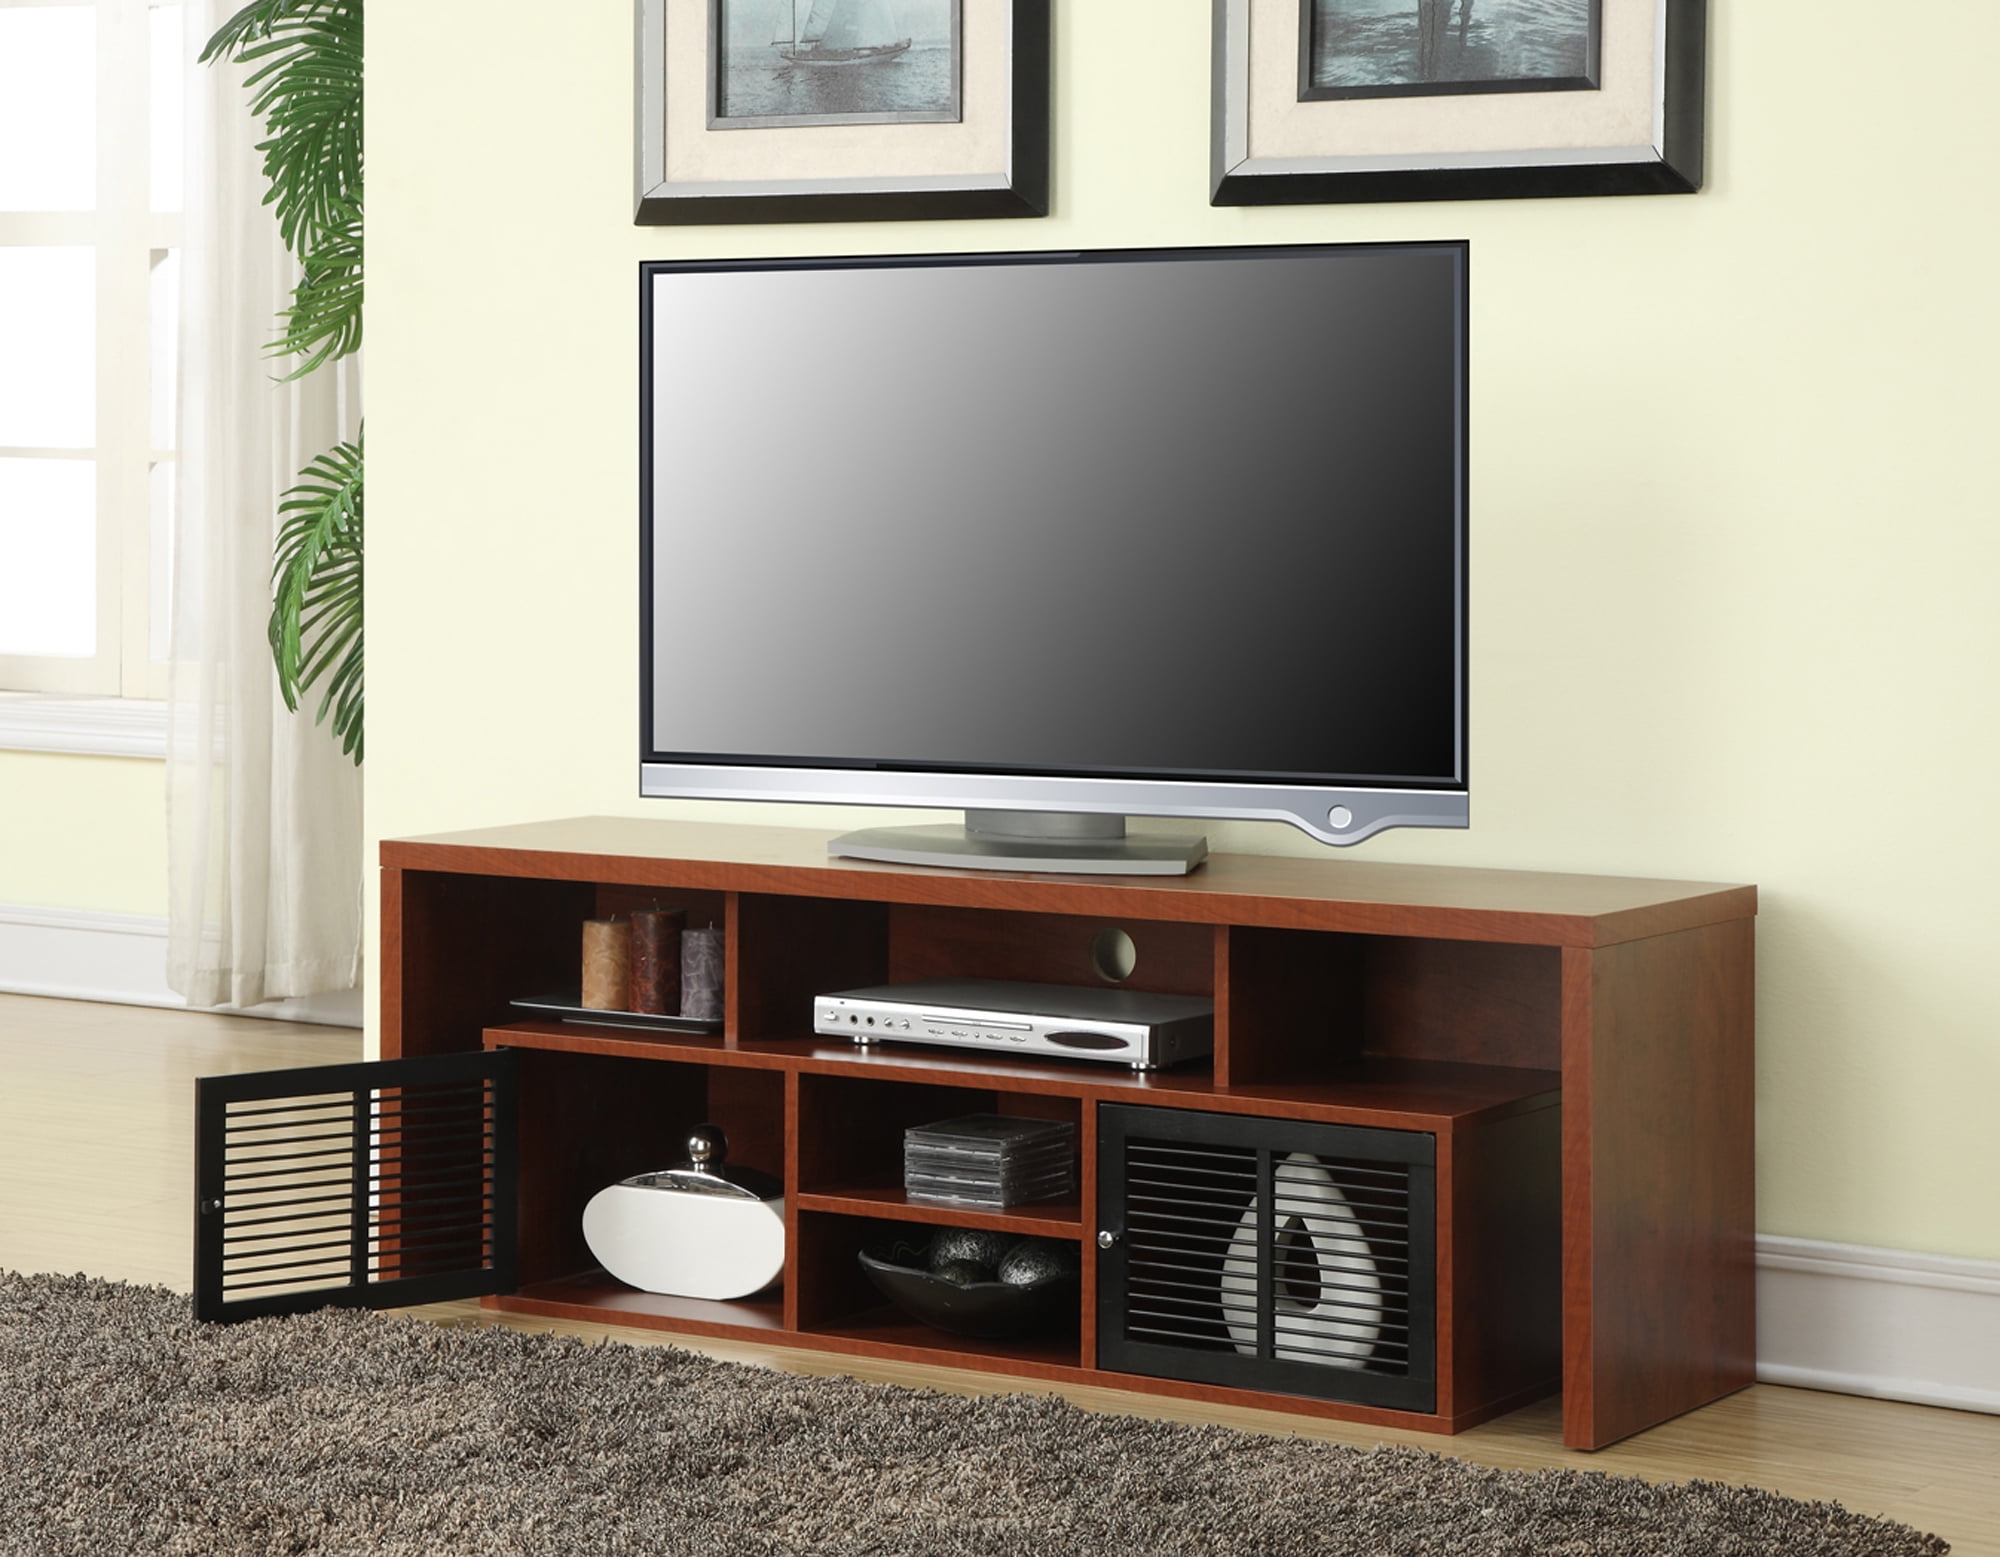 Convenience Concepts Lexington 65 inch TV Stand with Storage Cabinets and Shelves, Cherry - image 1 of 4